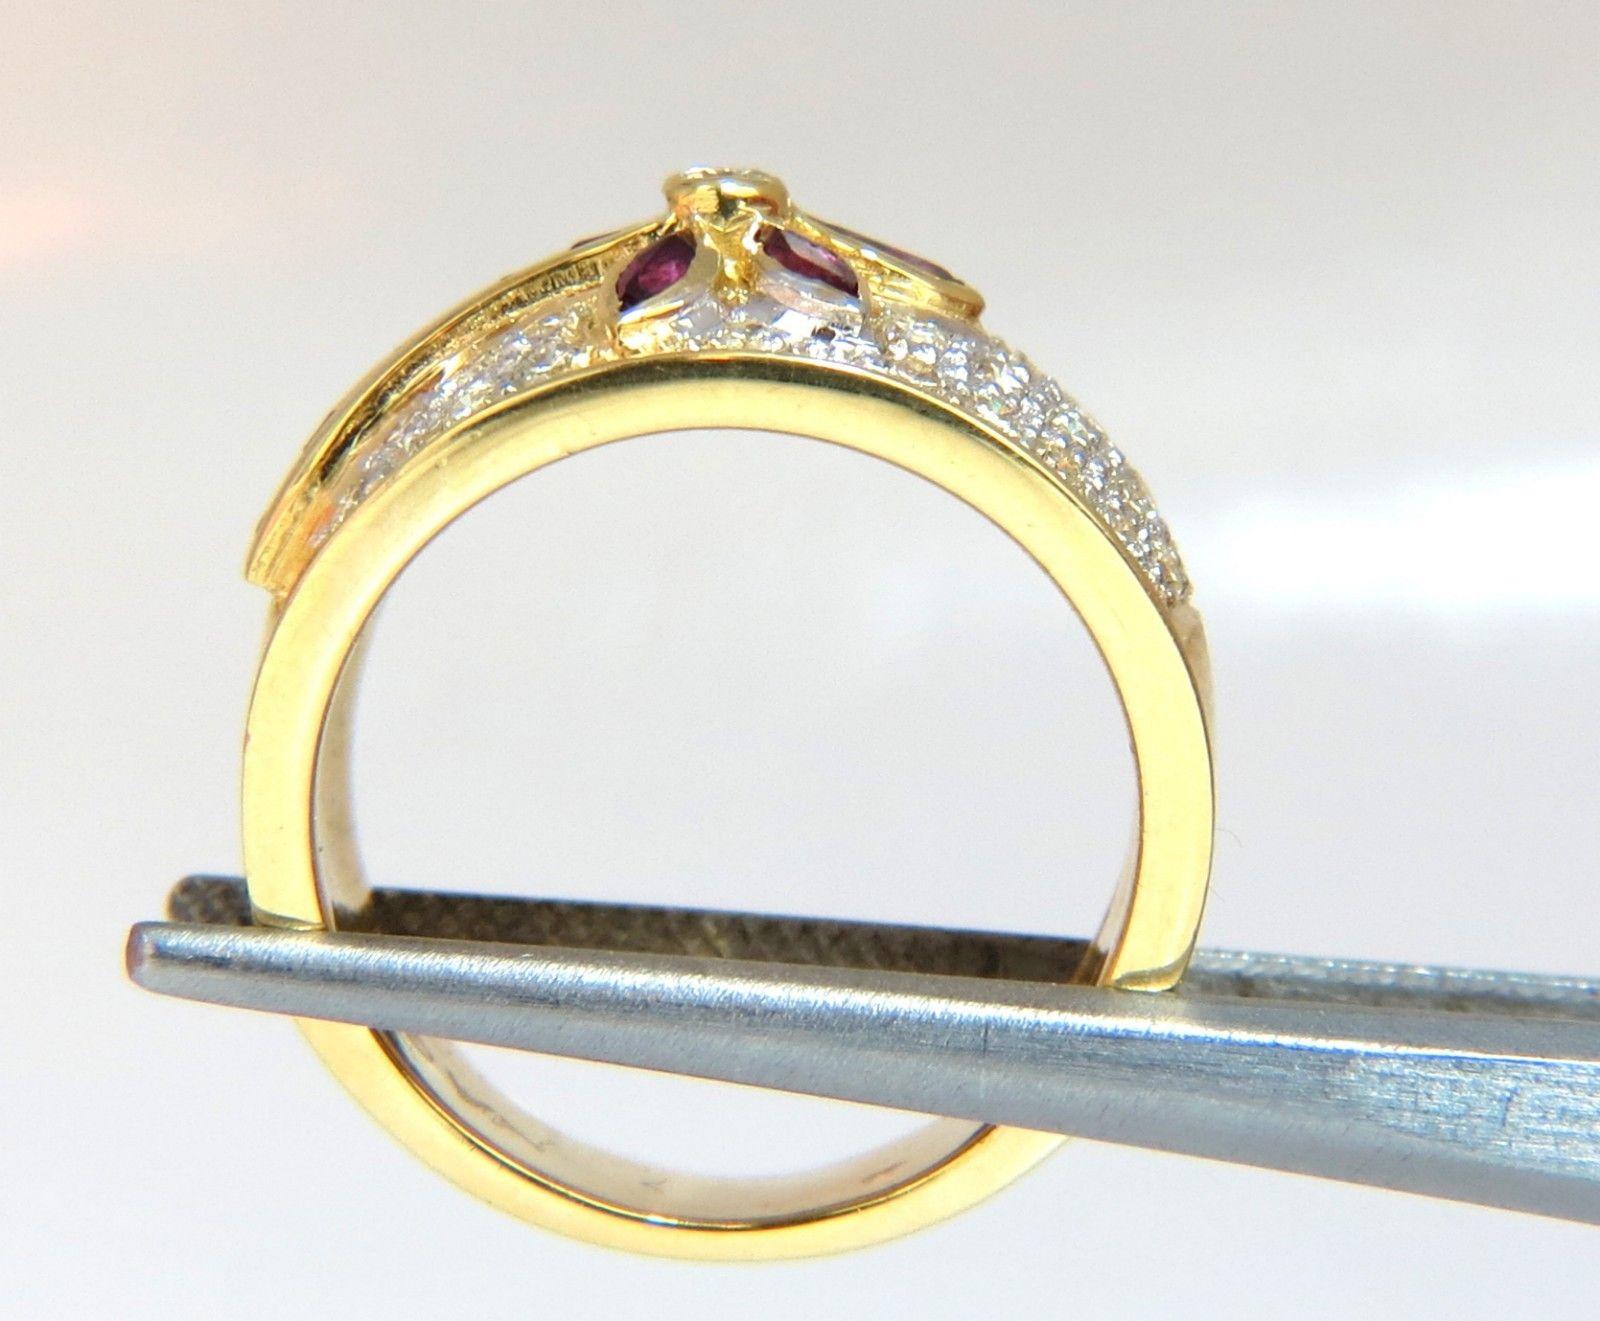  .50ct. Natural Ruby Cocktail ring 
Marquise & baguette cut, 
Fully faceted Clean clarity 
1.00ct. Diamonds:  Rounds, full cuts 
 G-color, Vs-2 clarity. 
 14kt. yellow gold. 
 10 grams. 
Deck of ring: 13mm wide
 Depth: 5mm 
 Current ring size: 7 
